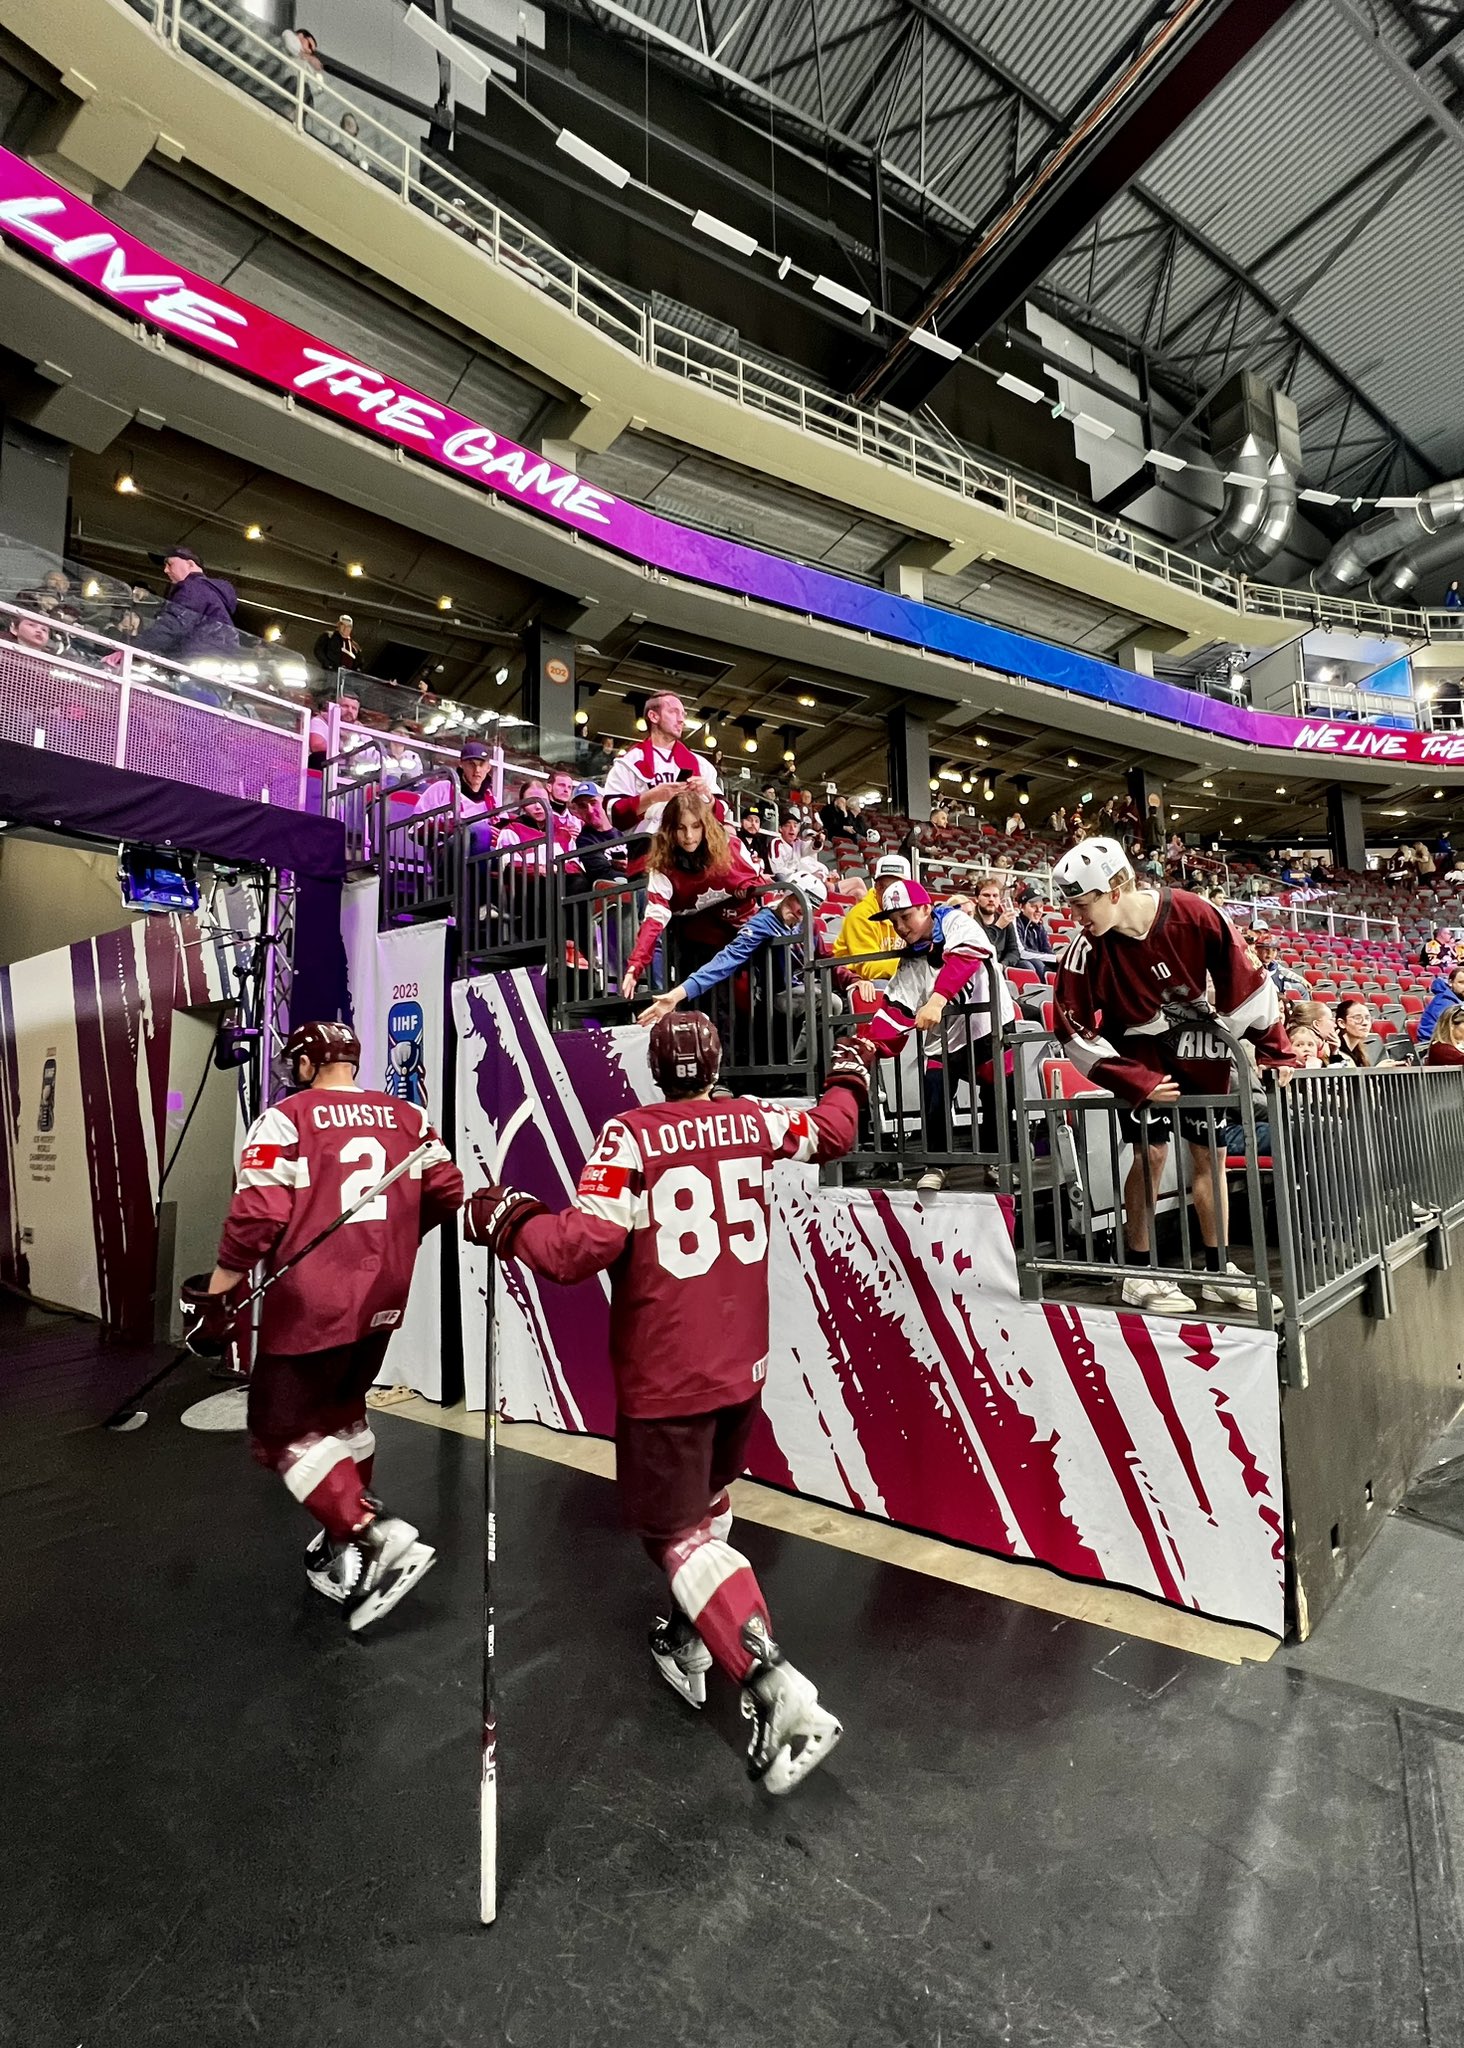 Latvia overpowers Slovenia 3-2 for third consecutive win